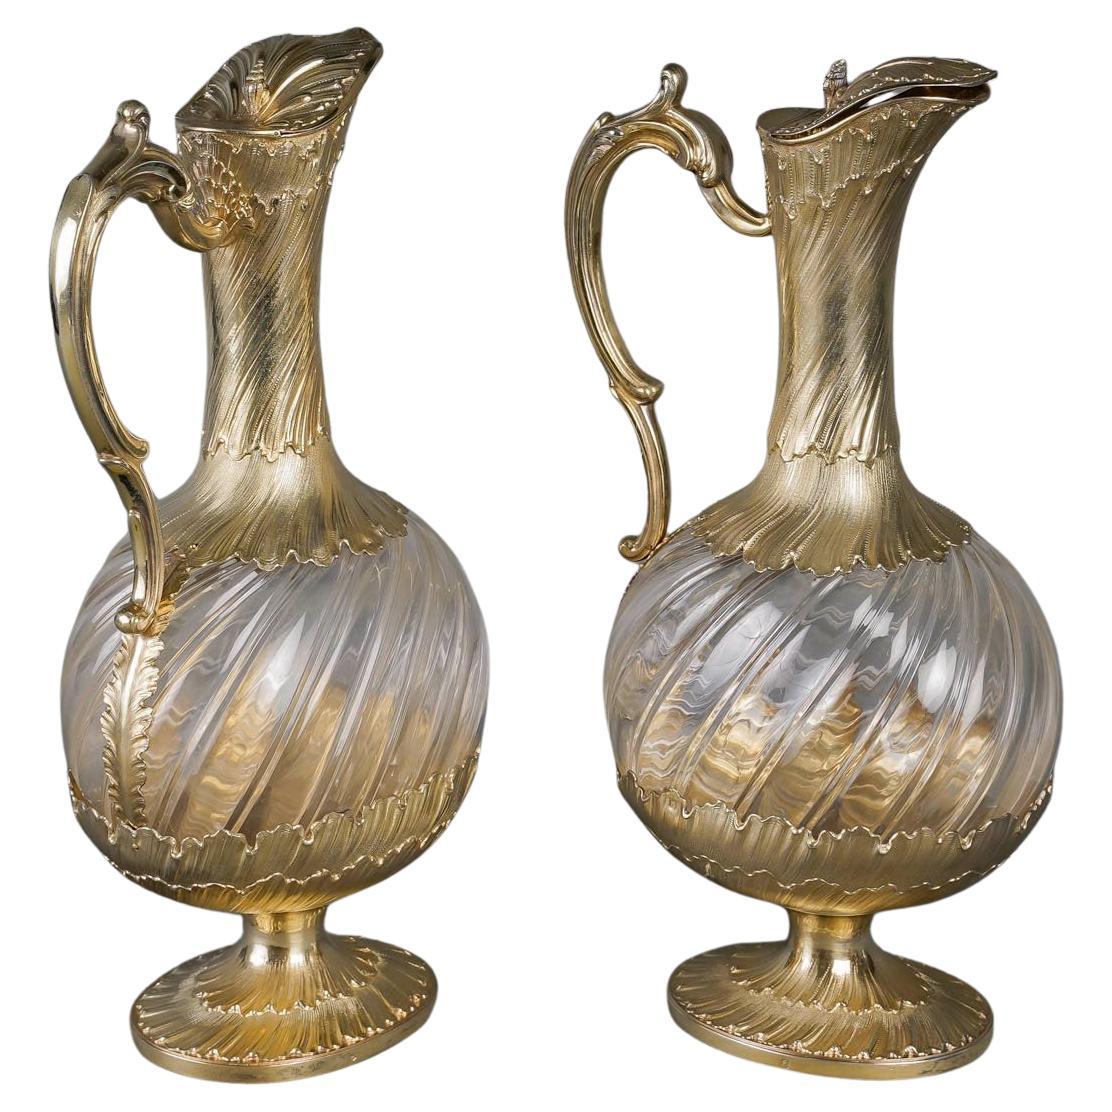 GUSTAVE ODIOT – Pair Of Crystal and Vermeil Ewers Circa 1870/1880